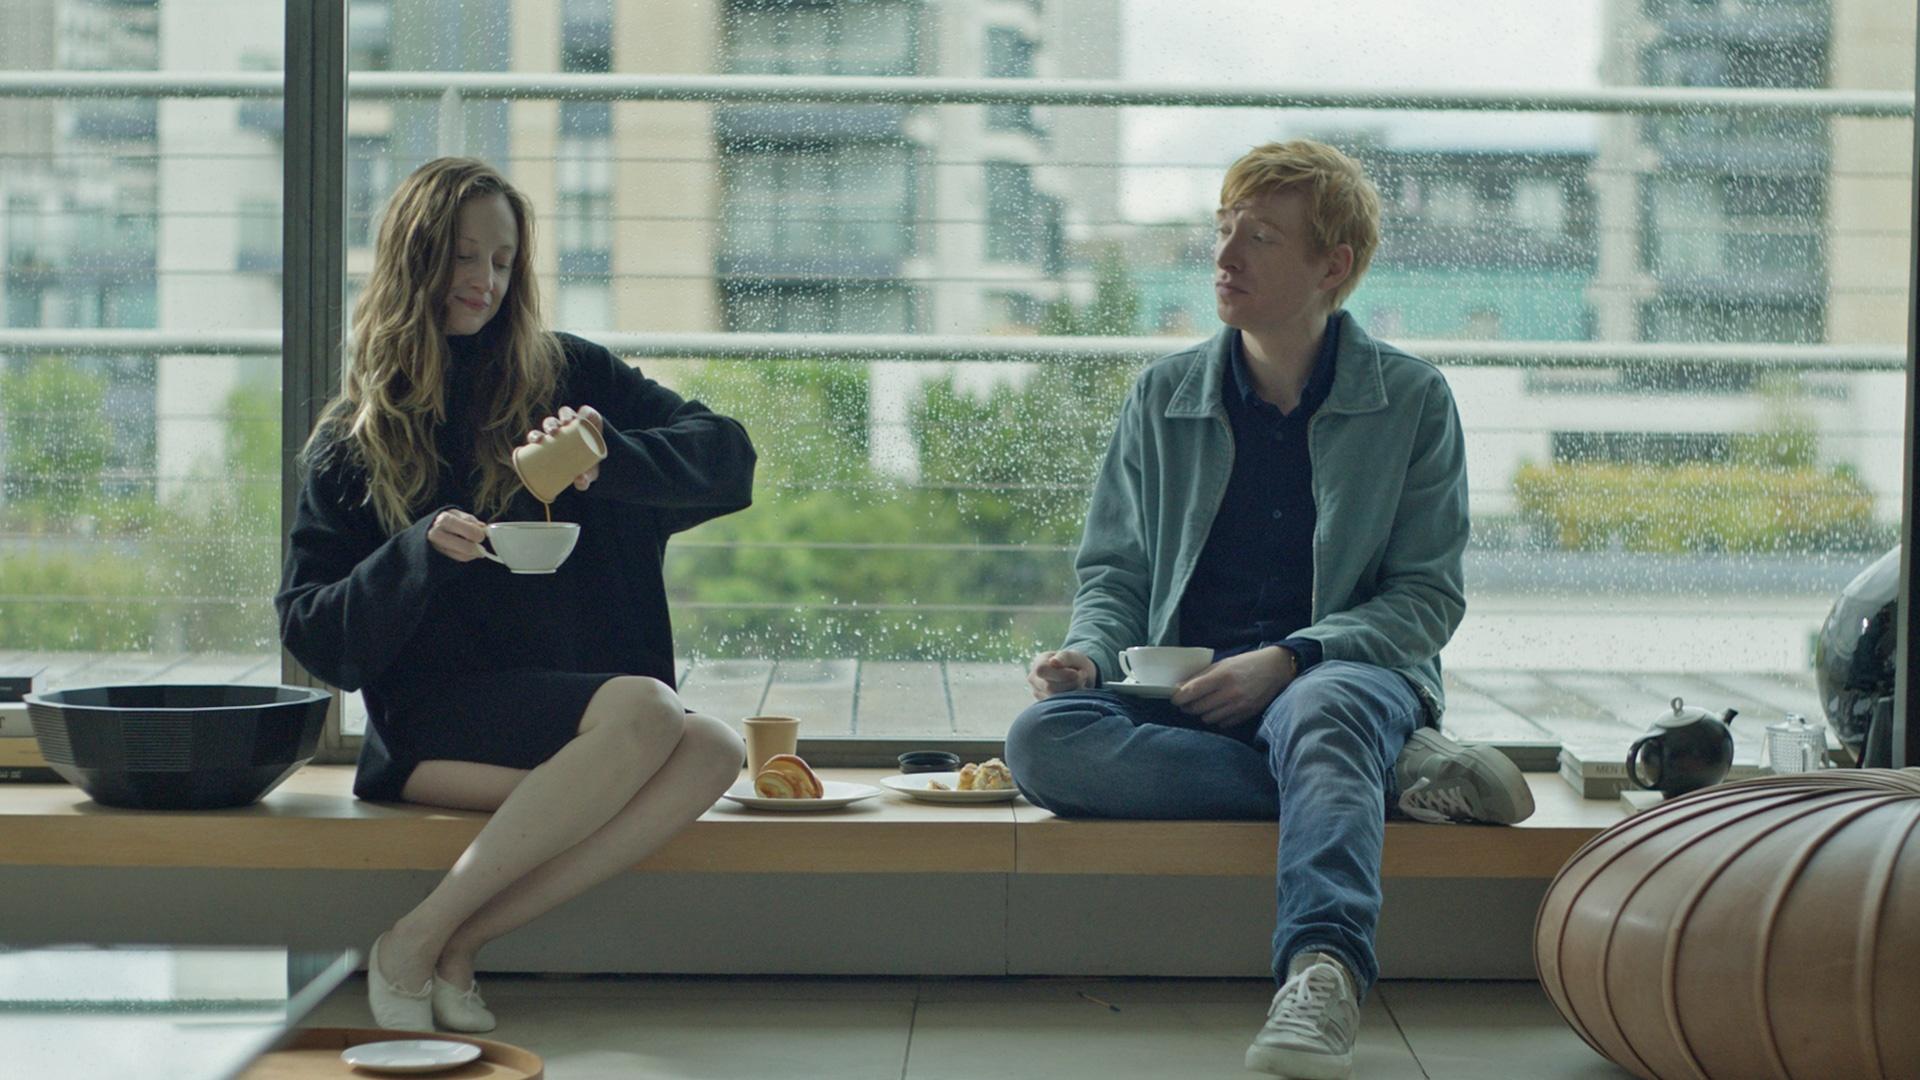  Andrea Riseborough as Alice and Domhnall Gleeson as Jack.